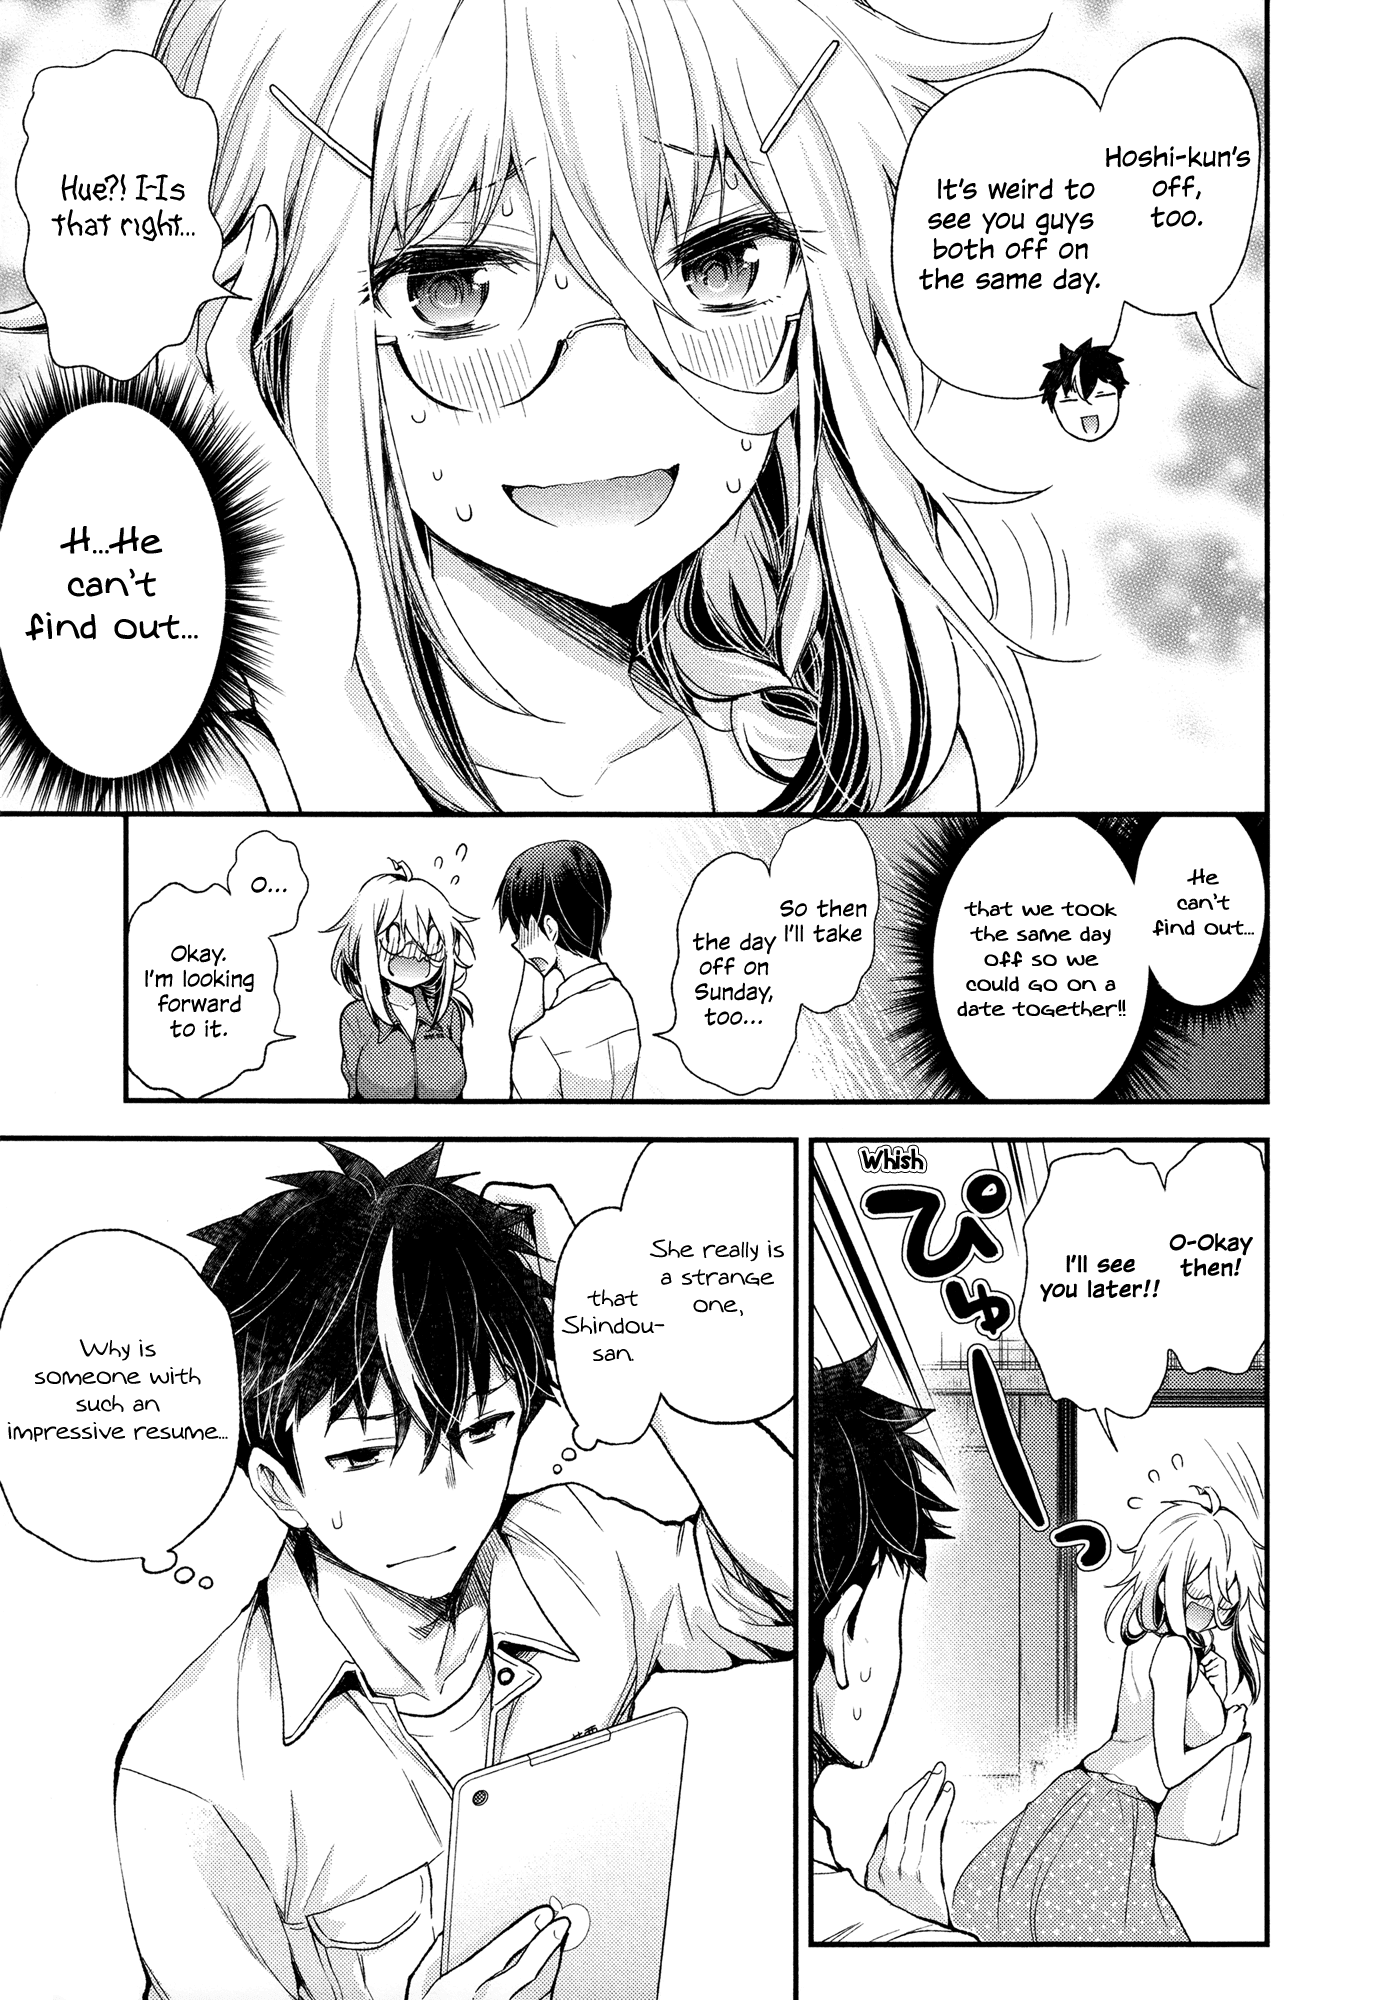 Shingeki No Eroko-San Chapter 7: Perversion 7 – I Accidentally Showed My Angel Something Obscene, But He Actually Just Told Me He Likes Me So I Died - Picture 3